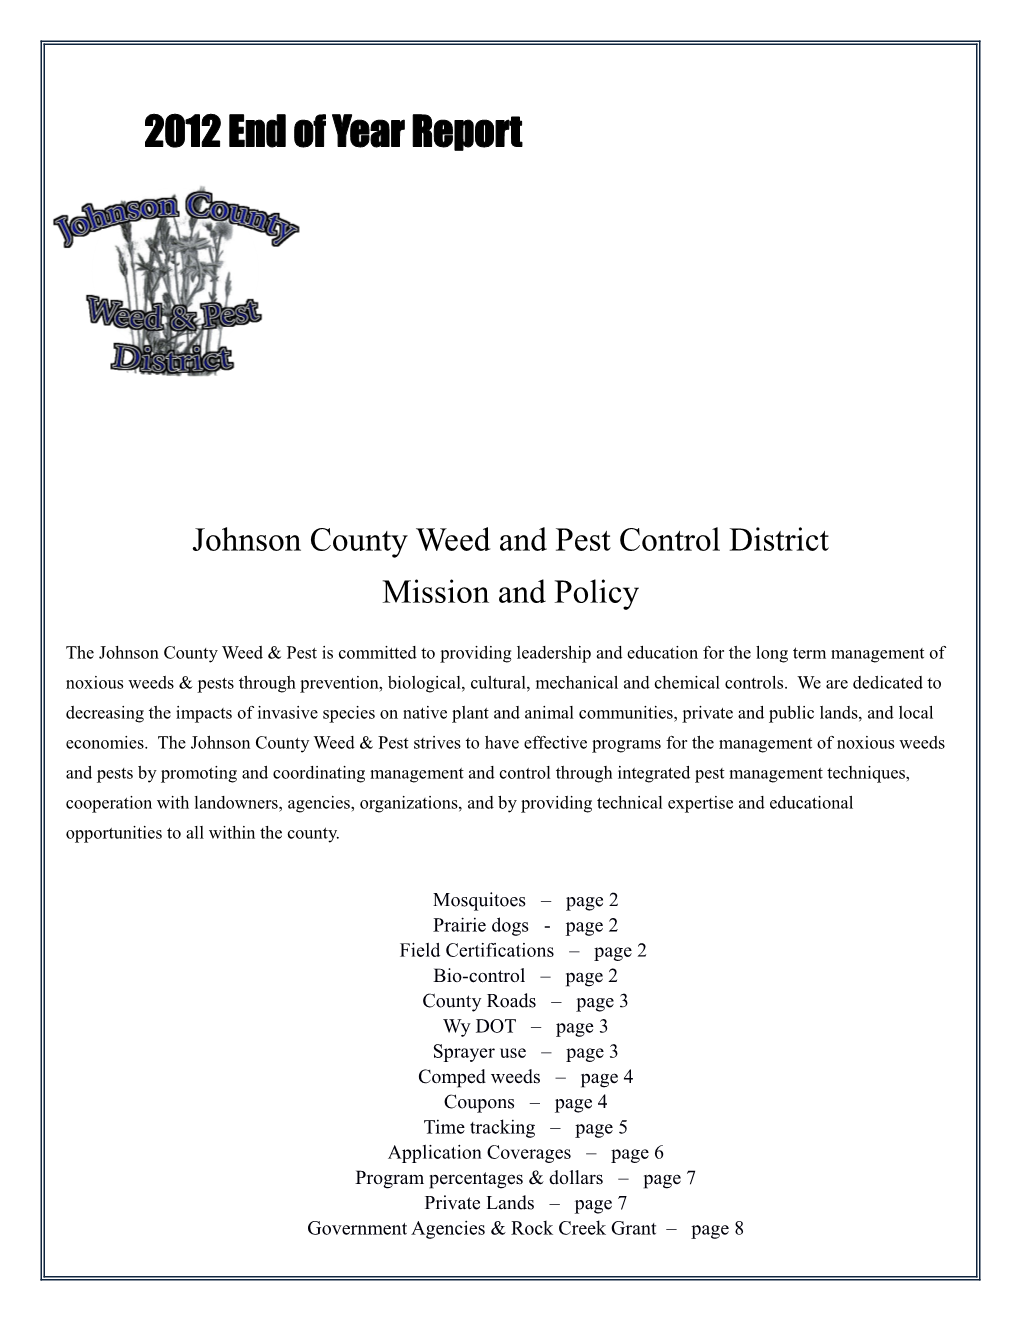 Johnson County Weed and Pest Control District